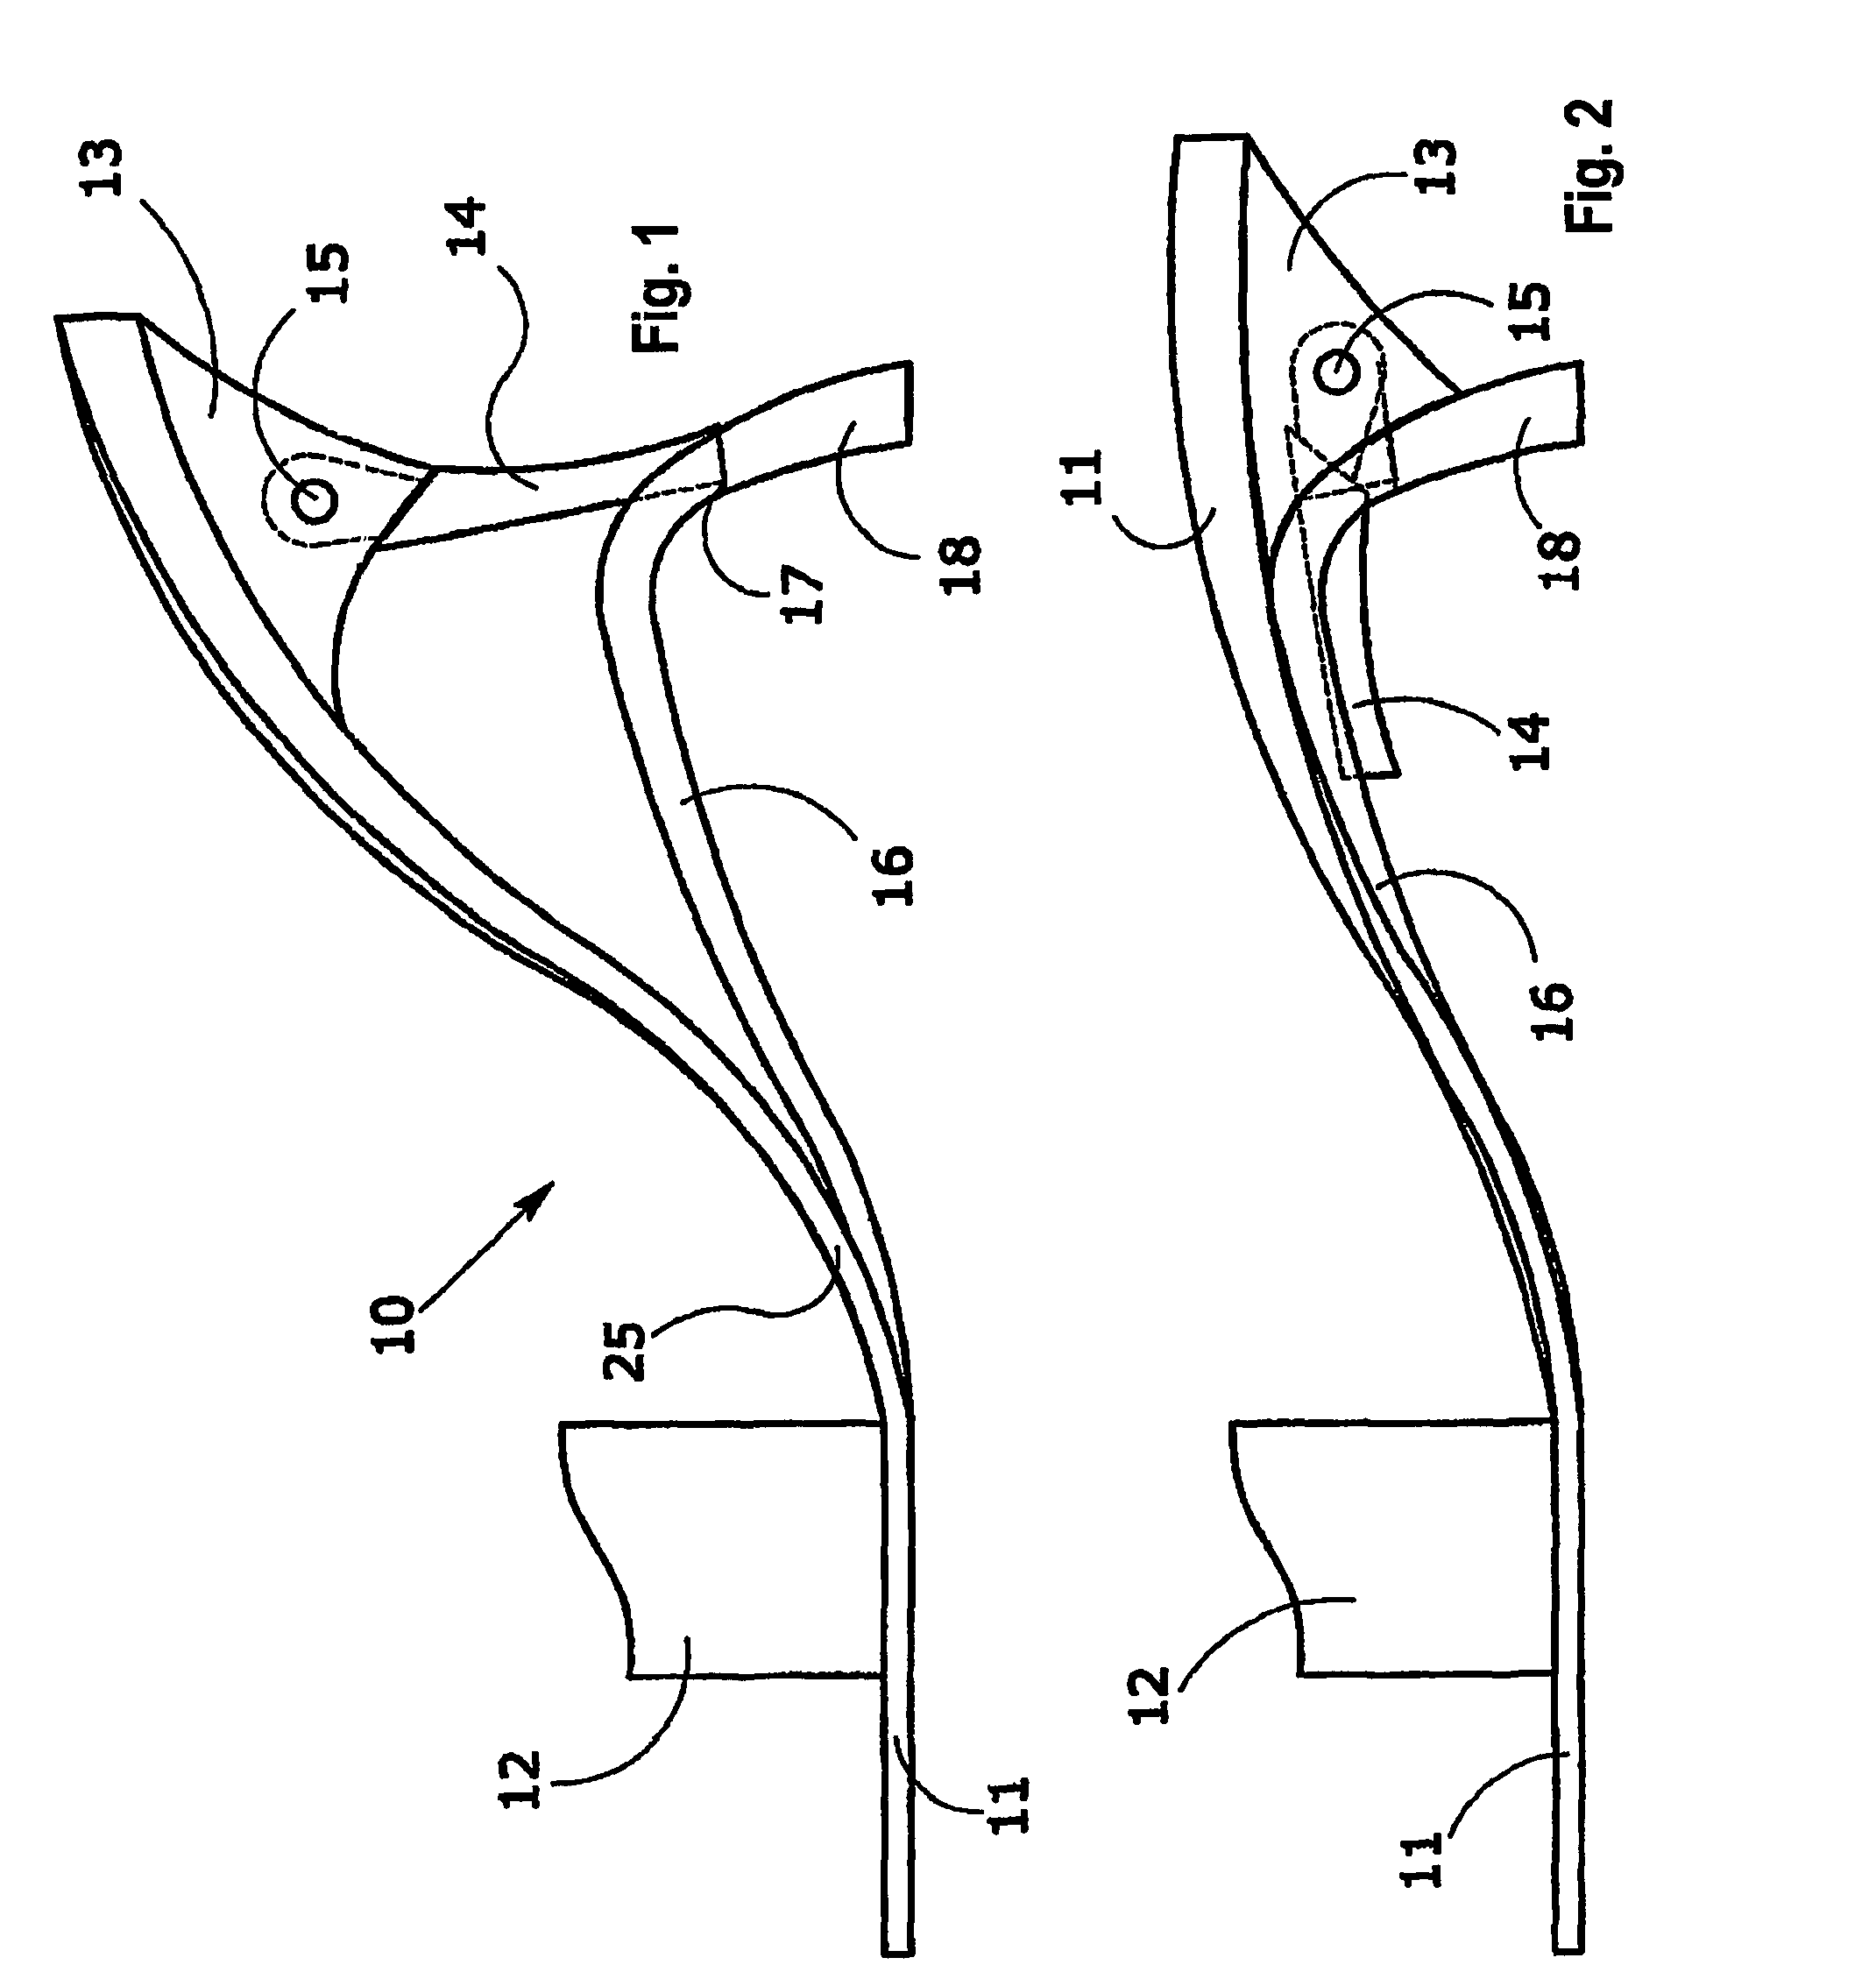 Footwear with variable configuration heel